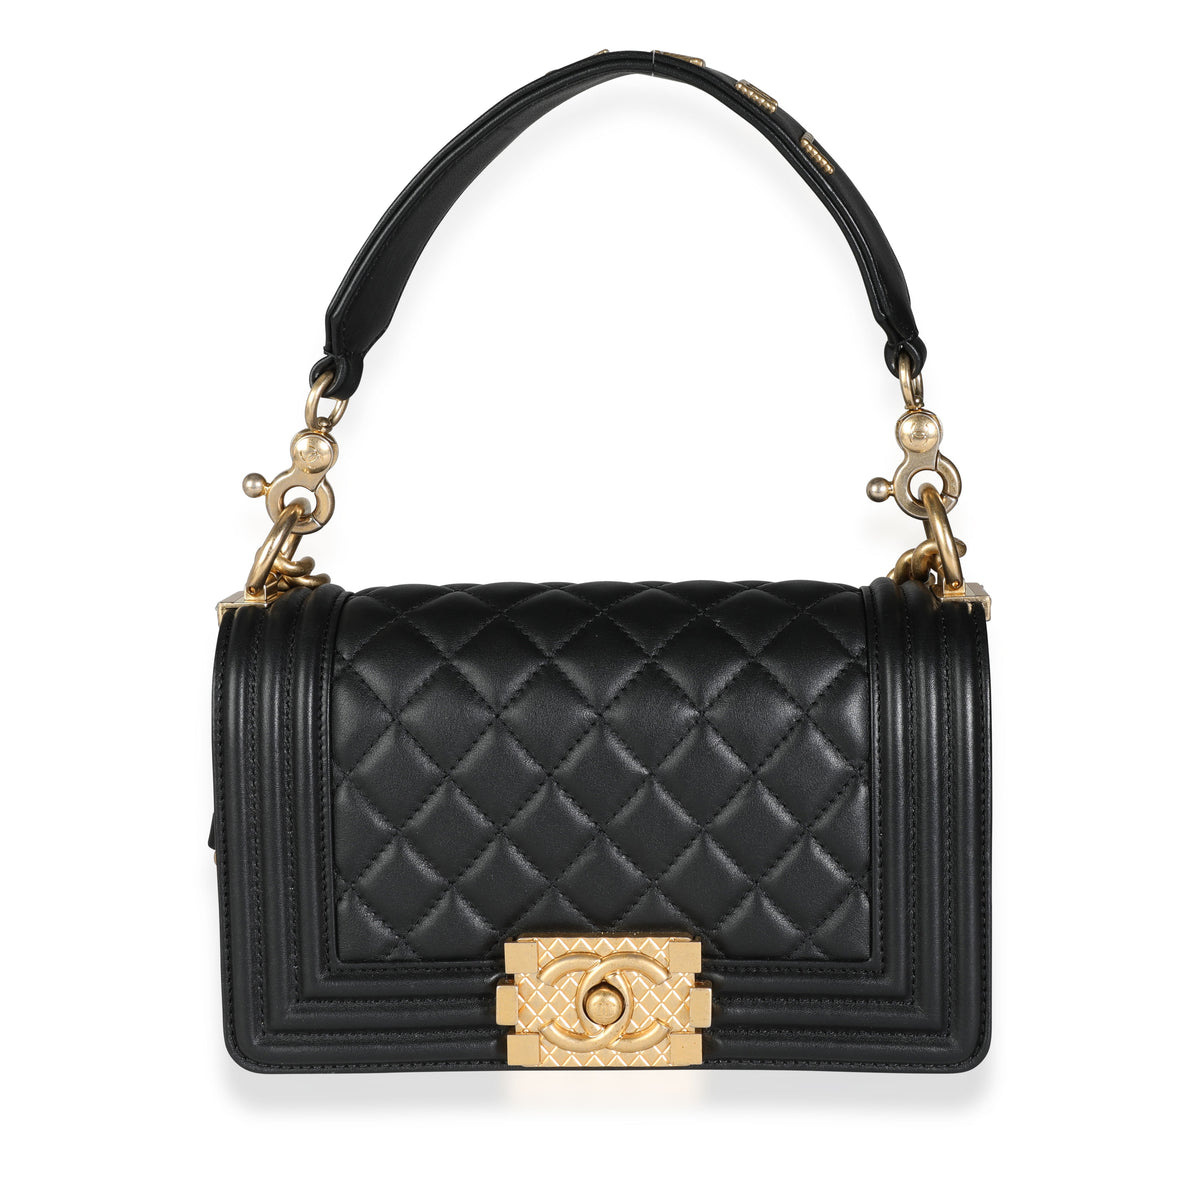 Chanel Black Lambskin Quilted Signature Handle Small Boy Bag, myGemma